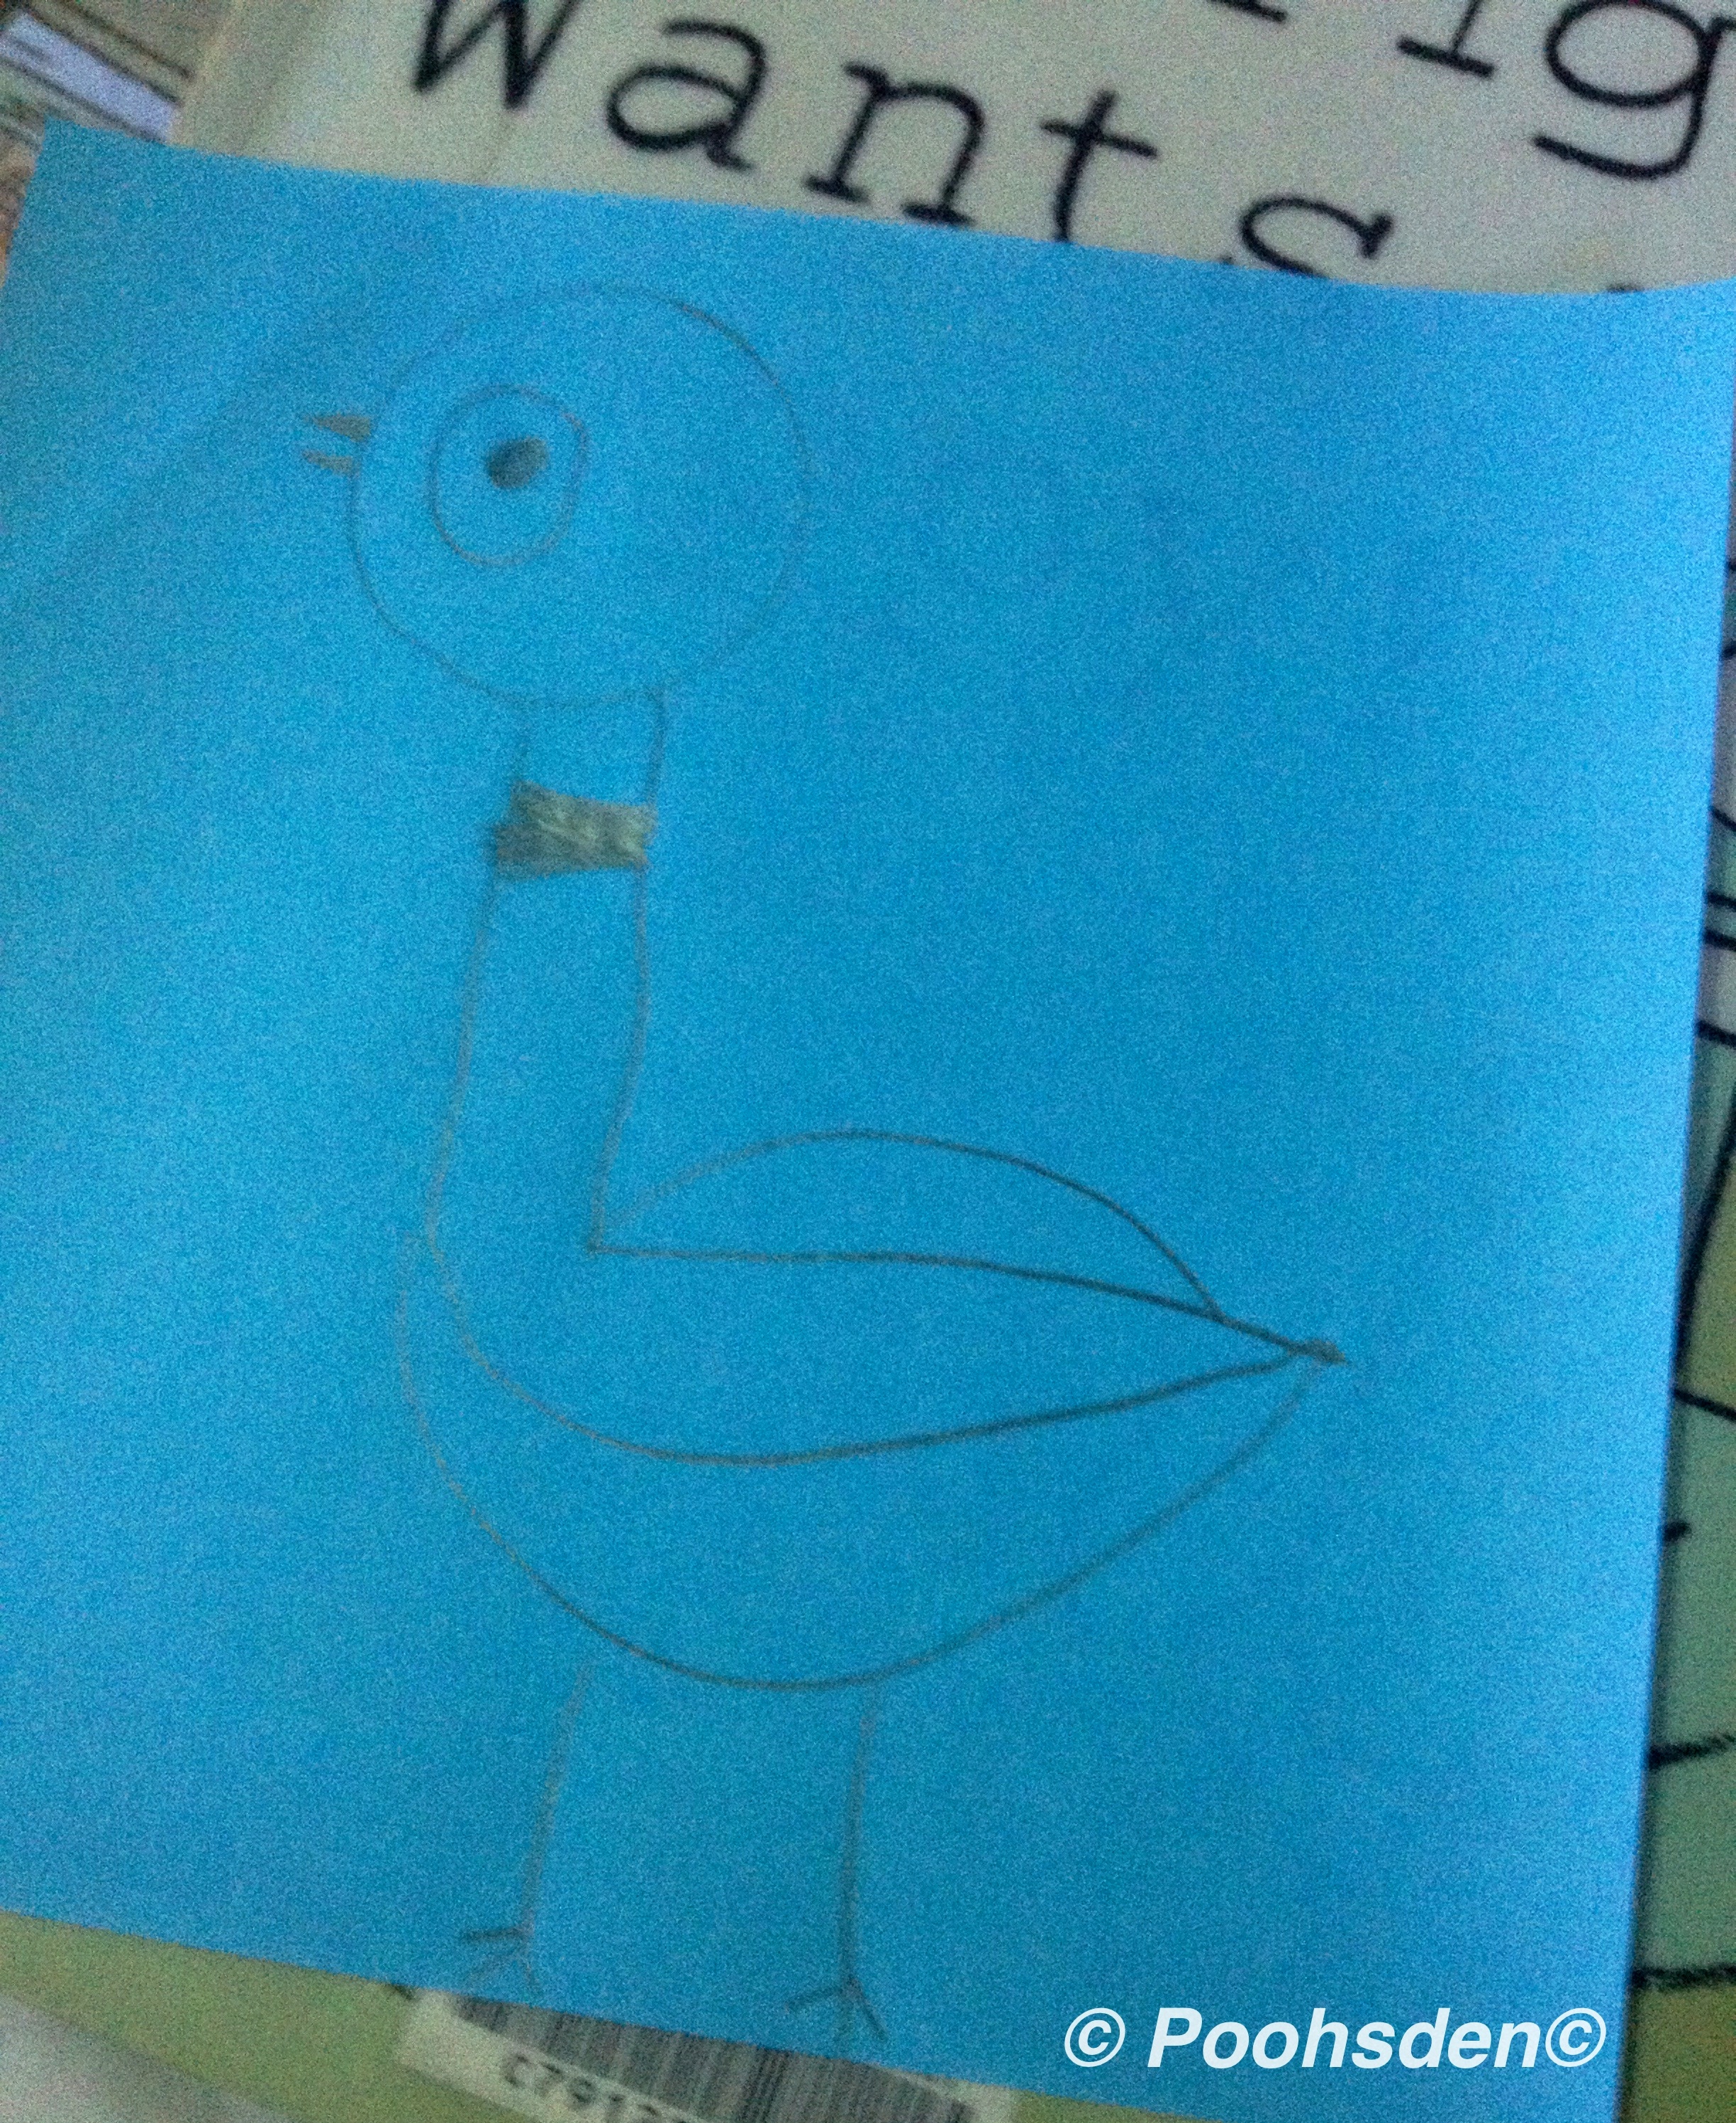 Kuttyma 's attempt to capture the quirky pigeon